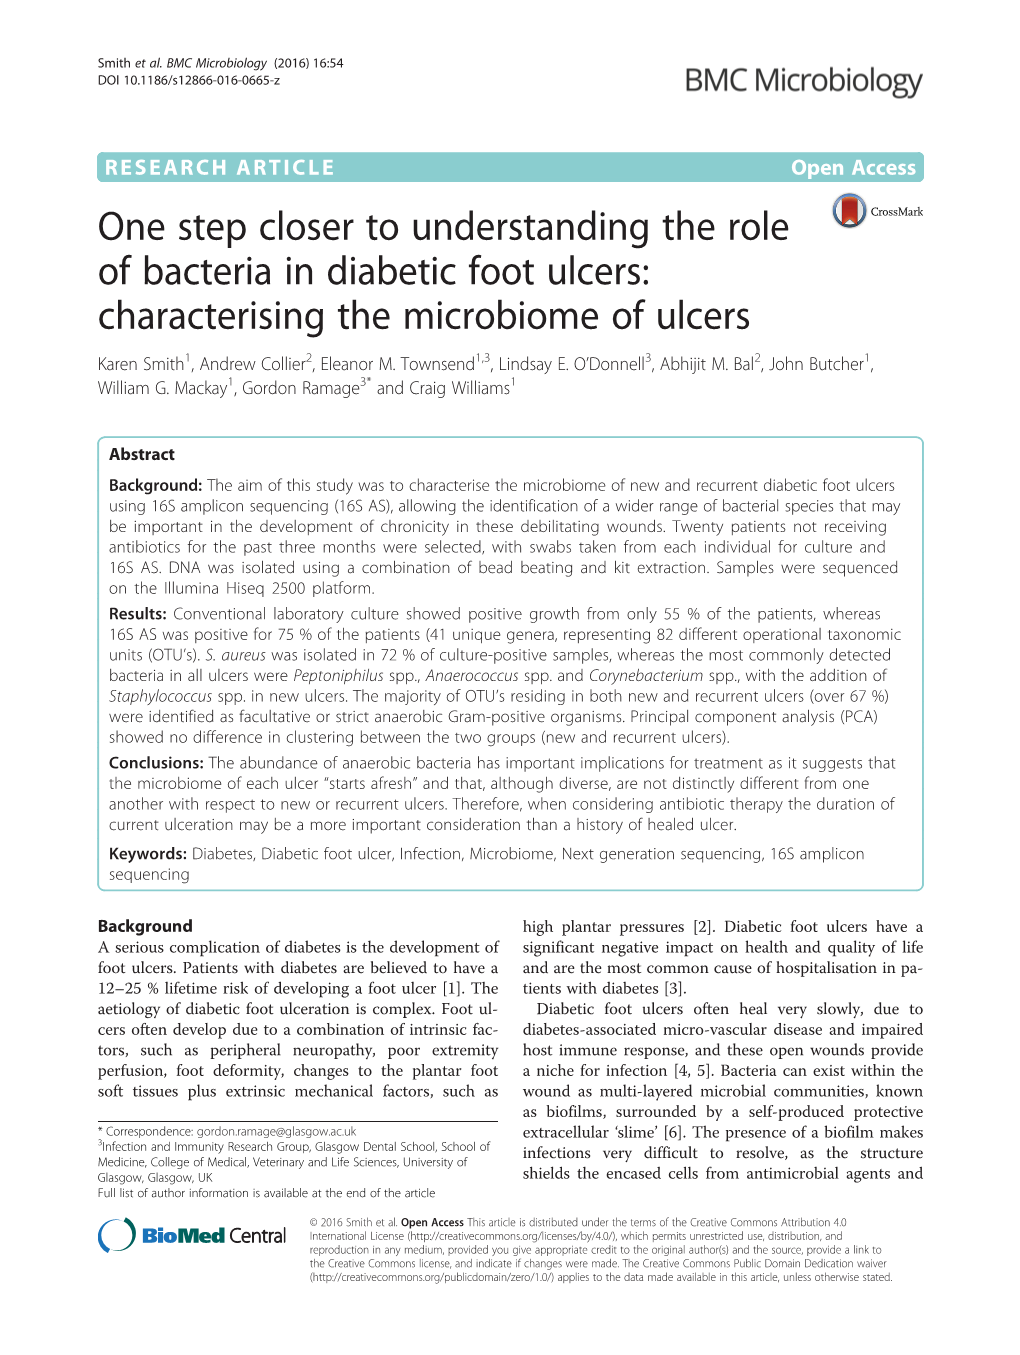 Foot Ulcers: Characterising the Microbiome of Ulcers Karen Smith1, Andrew Collier2, Eleanor M